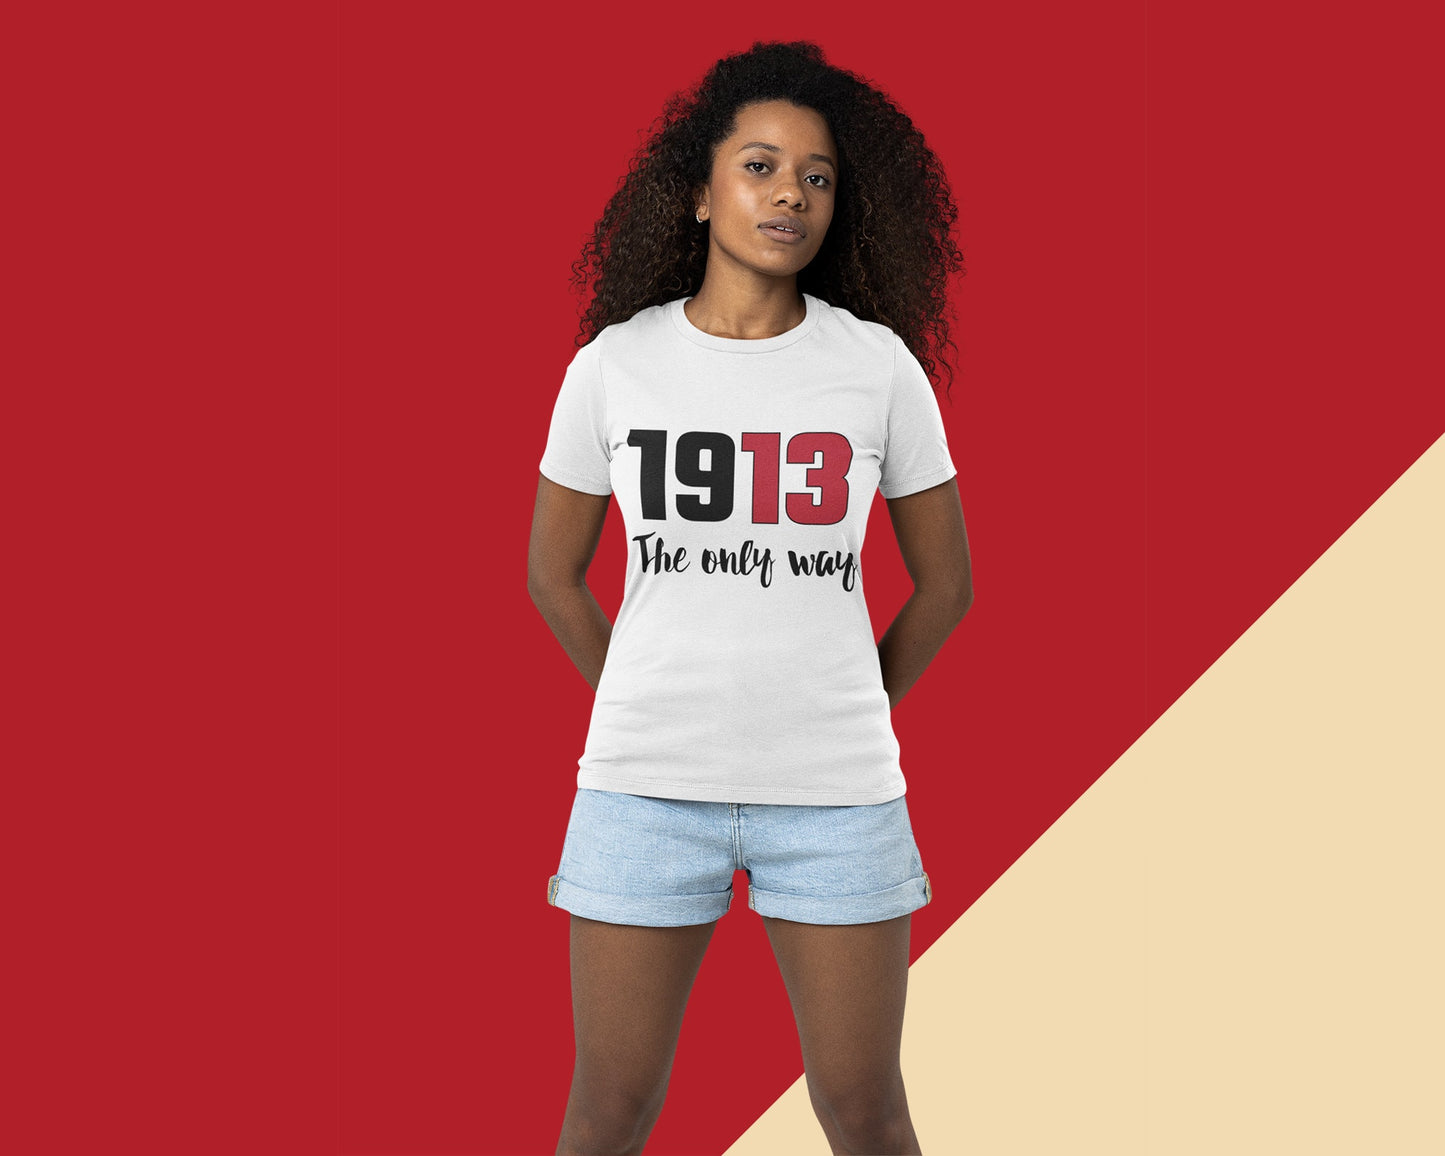 19:13 The Only Way Unisex T-Shirt